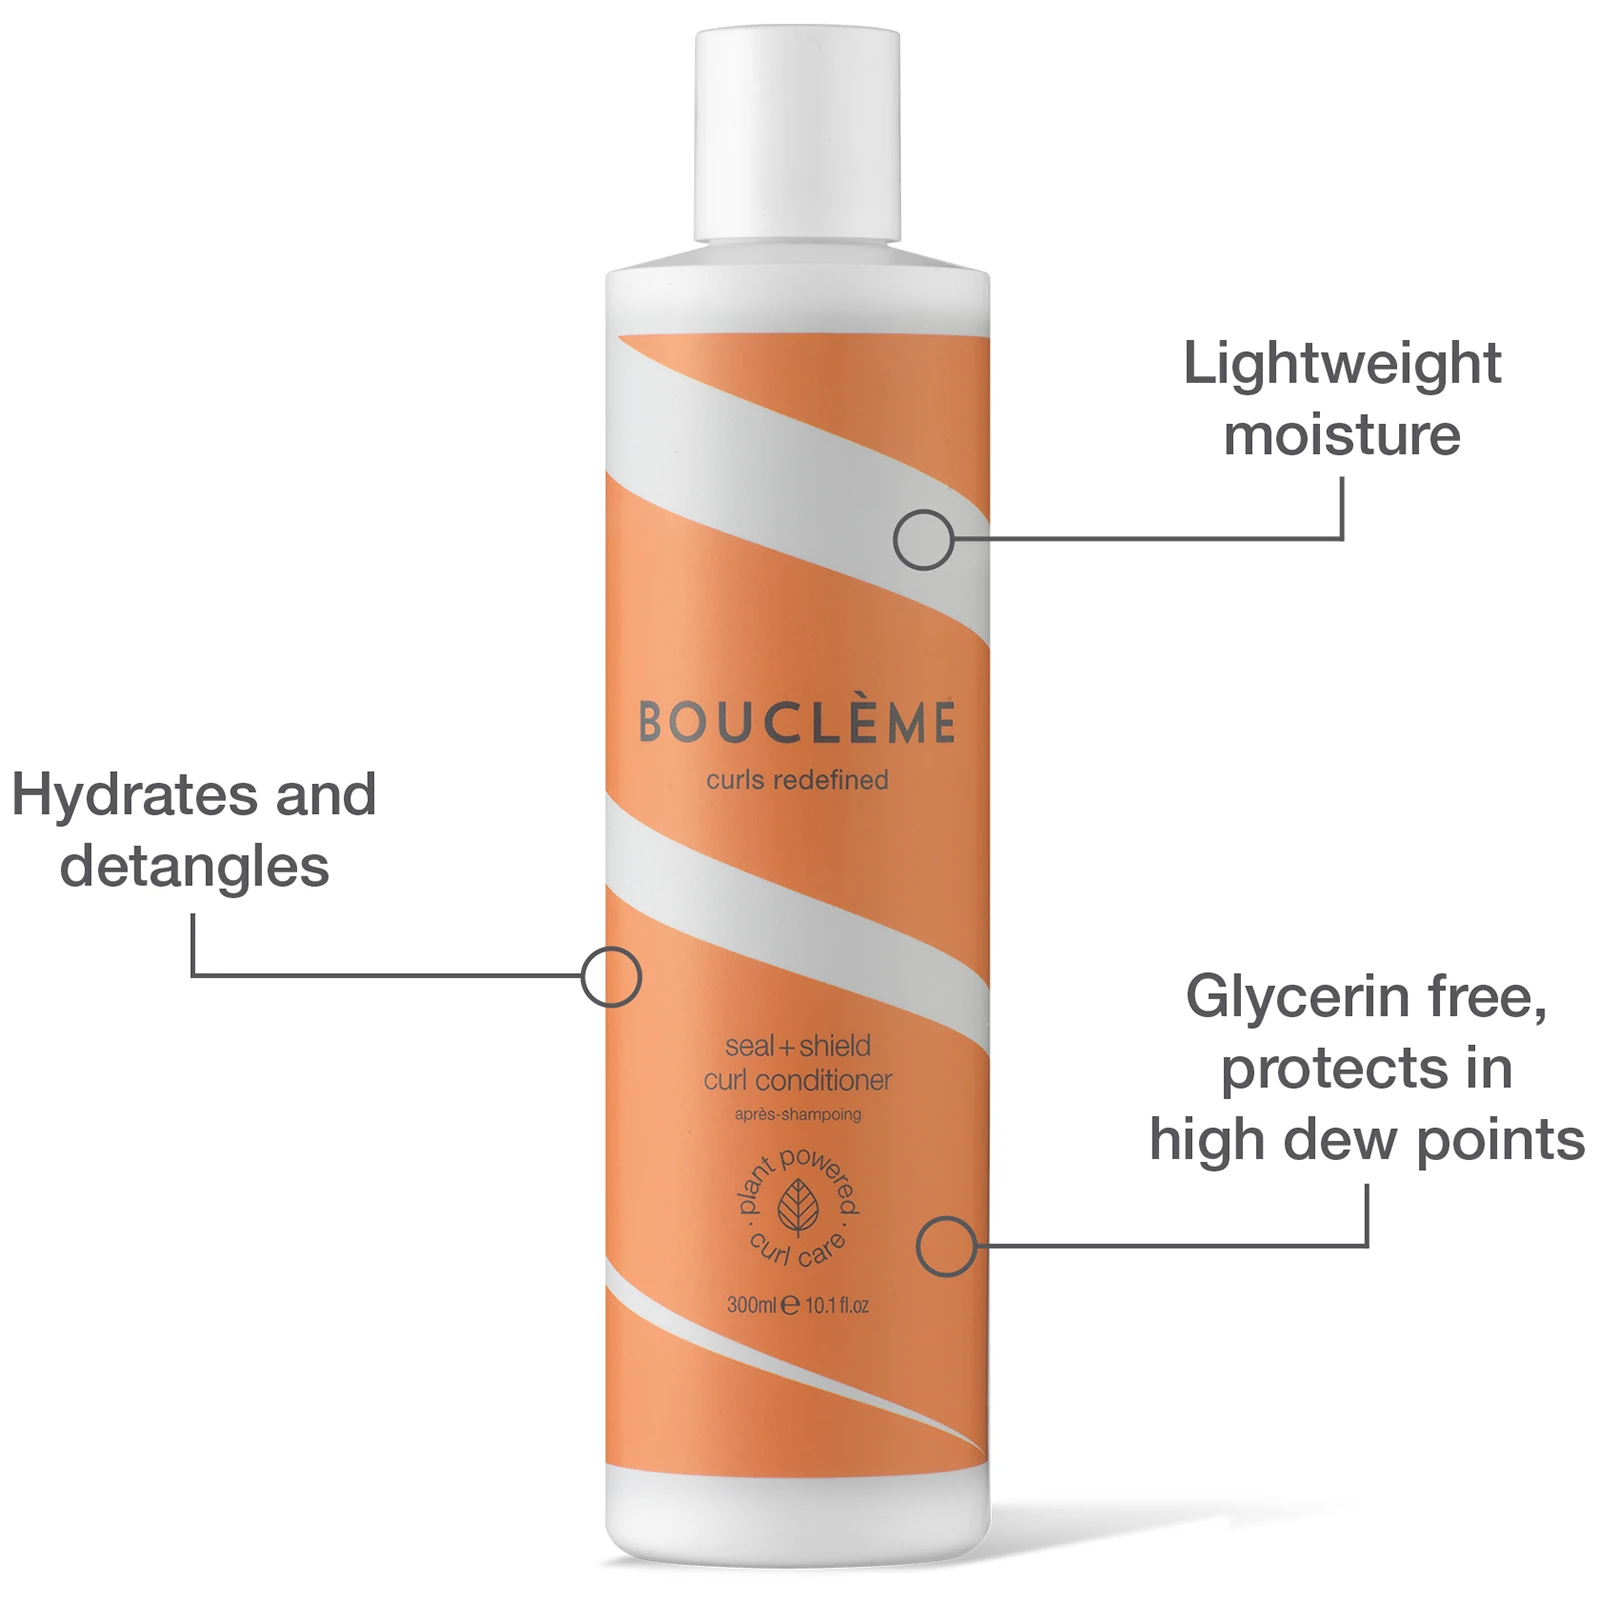 lightweight moisture, hydrates and detangles, glycerin free hydrates in high dew points.